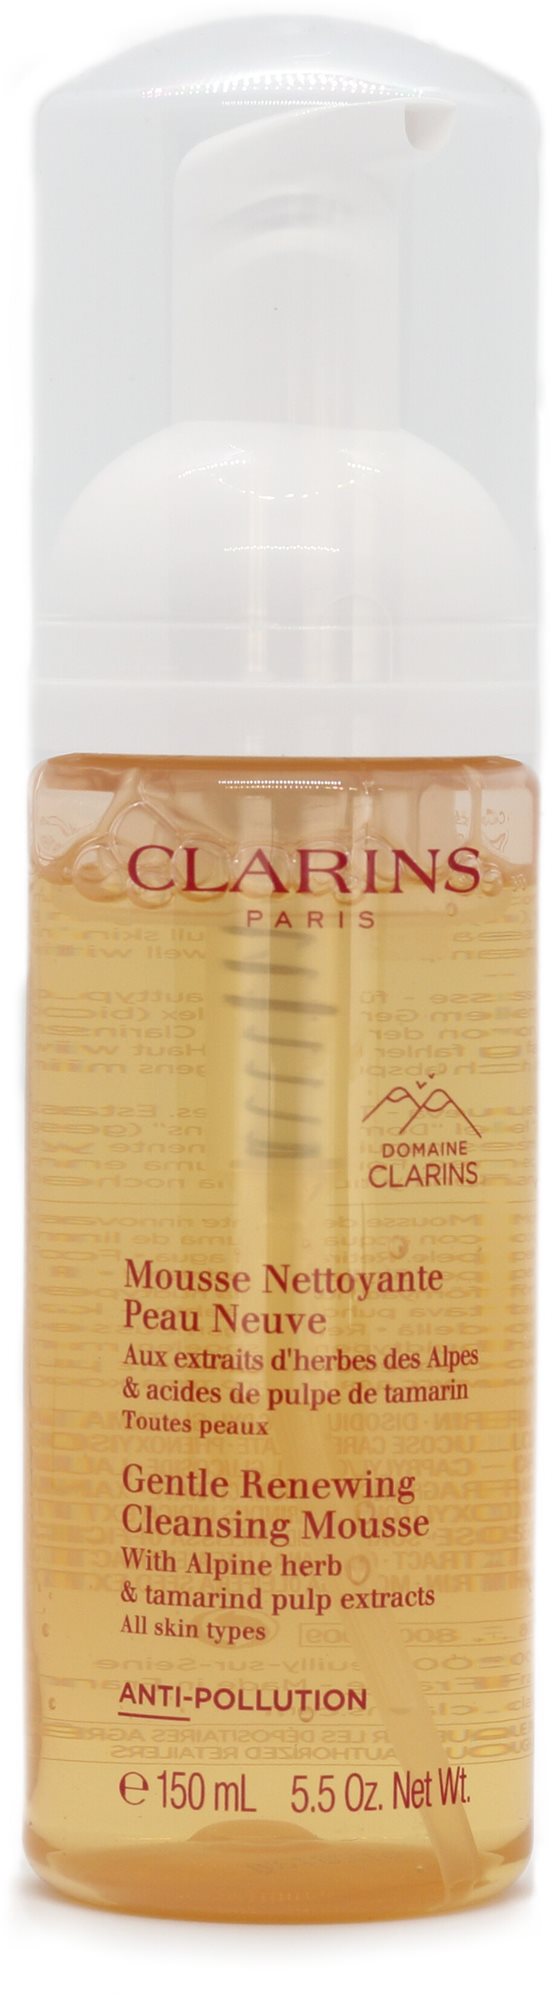 CLARINS Gentle Renewing Cleansing Mousse 150 ml